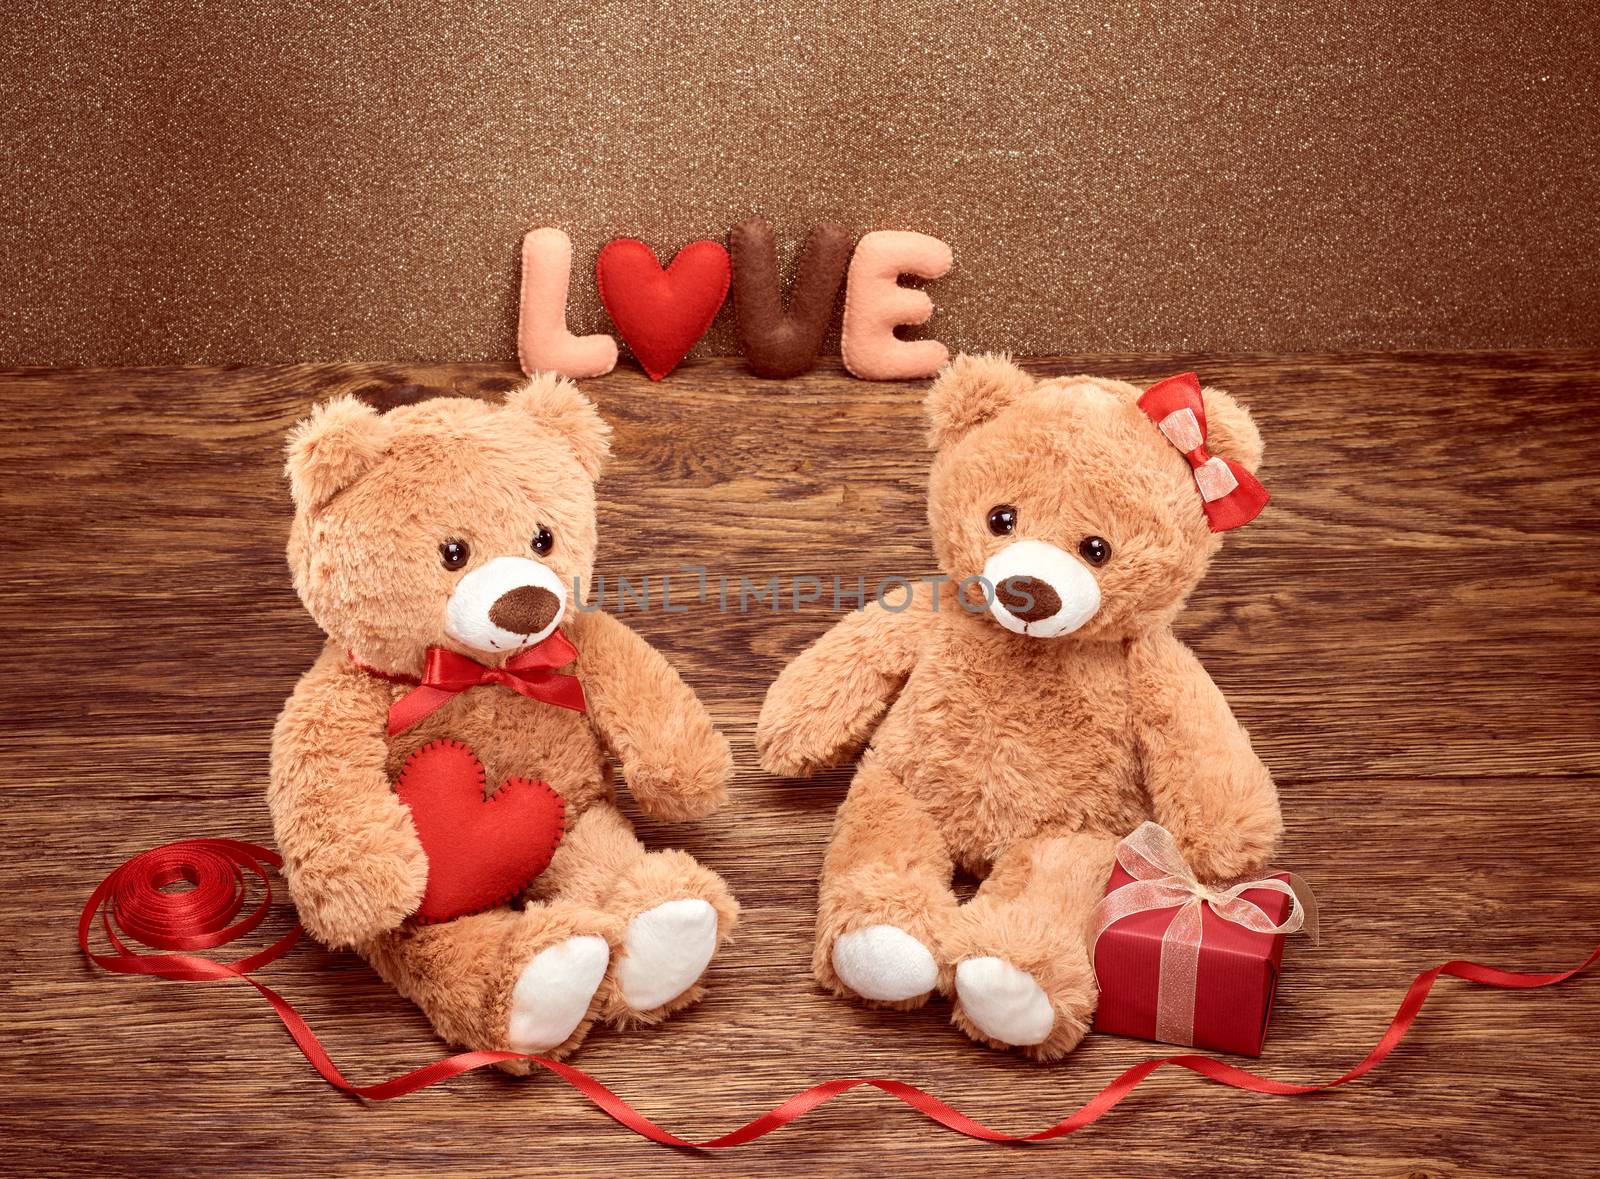 Valentines Day. Word Love heart. Couple Teddy Bears loving, date. Handmade red gift box. Vintage retro romantic style. Unusual creative greeting card on wood, shiny. Family, wedding and friendship